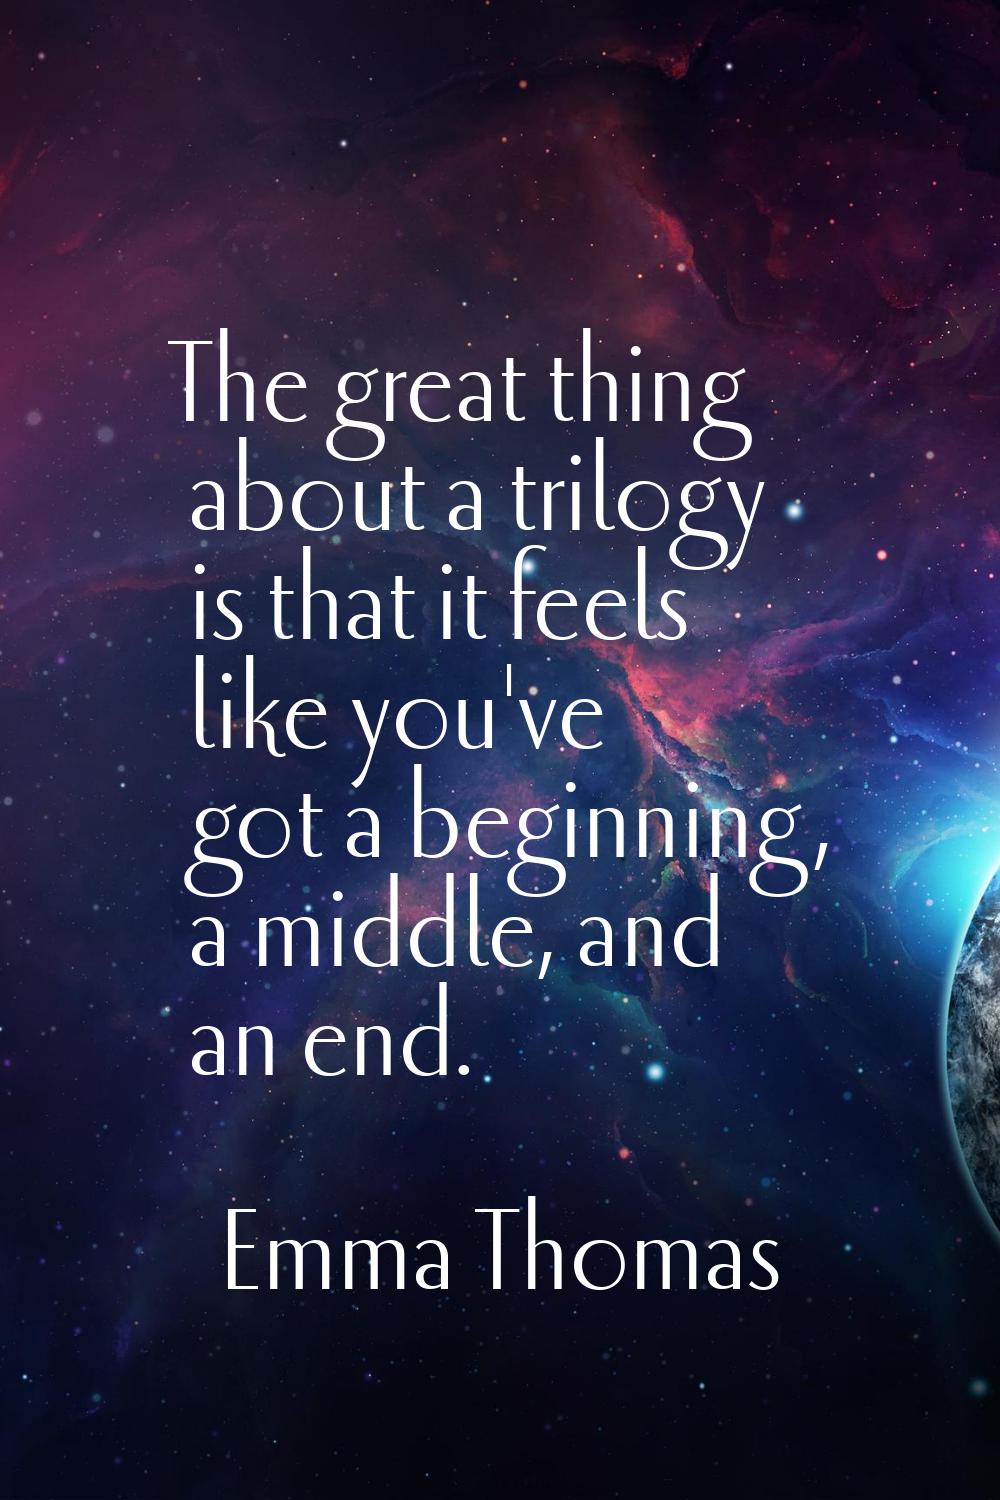 The great thing about a trilogy is that it feels like you've got a beginning, a middle, and an end.